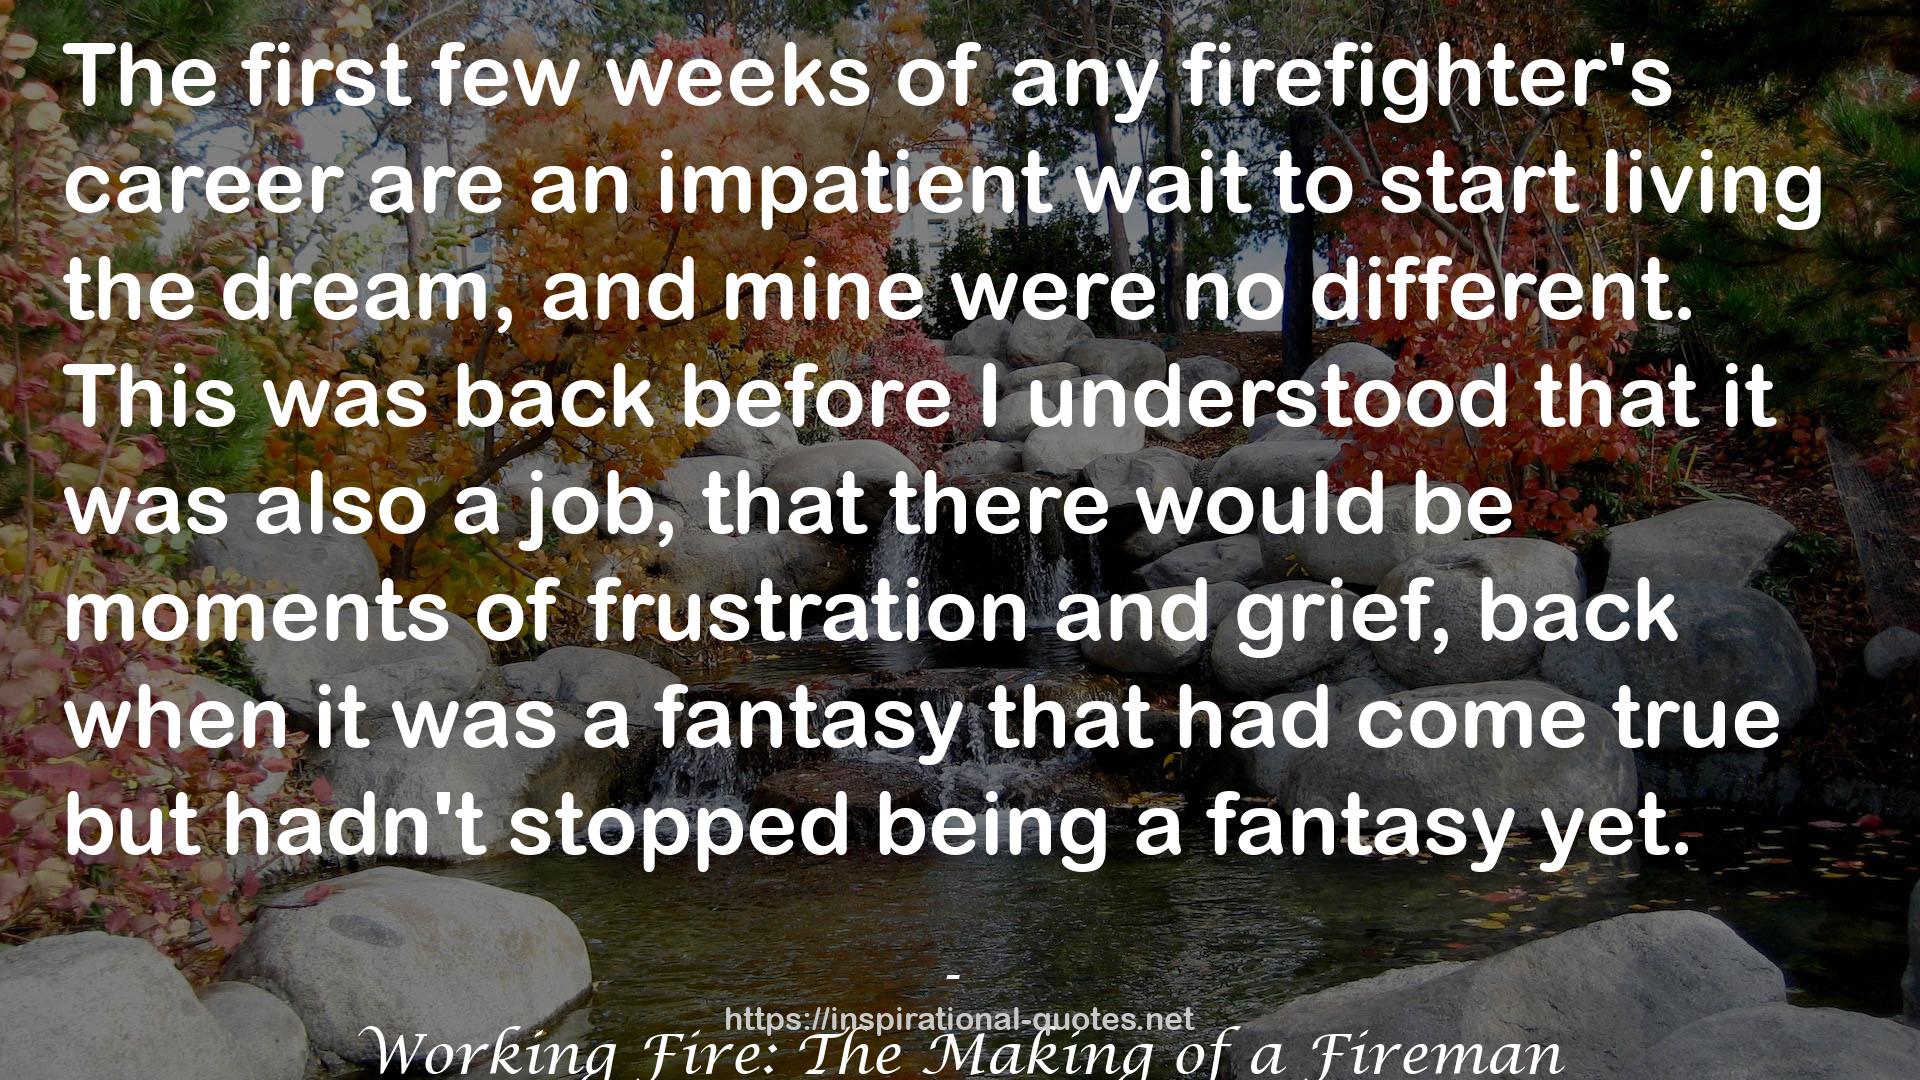 Working Fire: The Making of a Fireman QUOTES